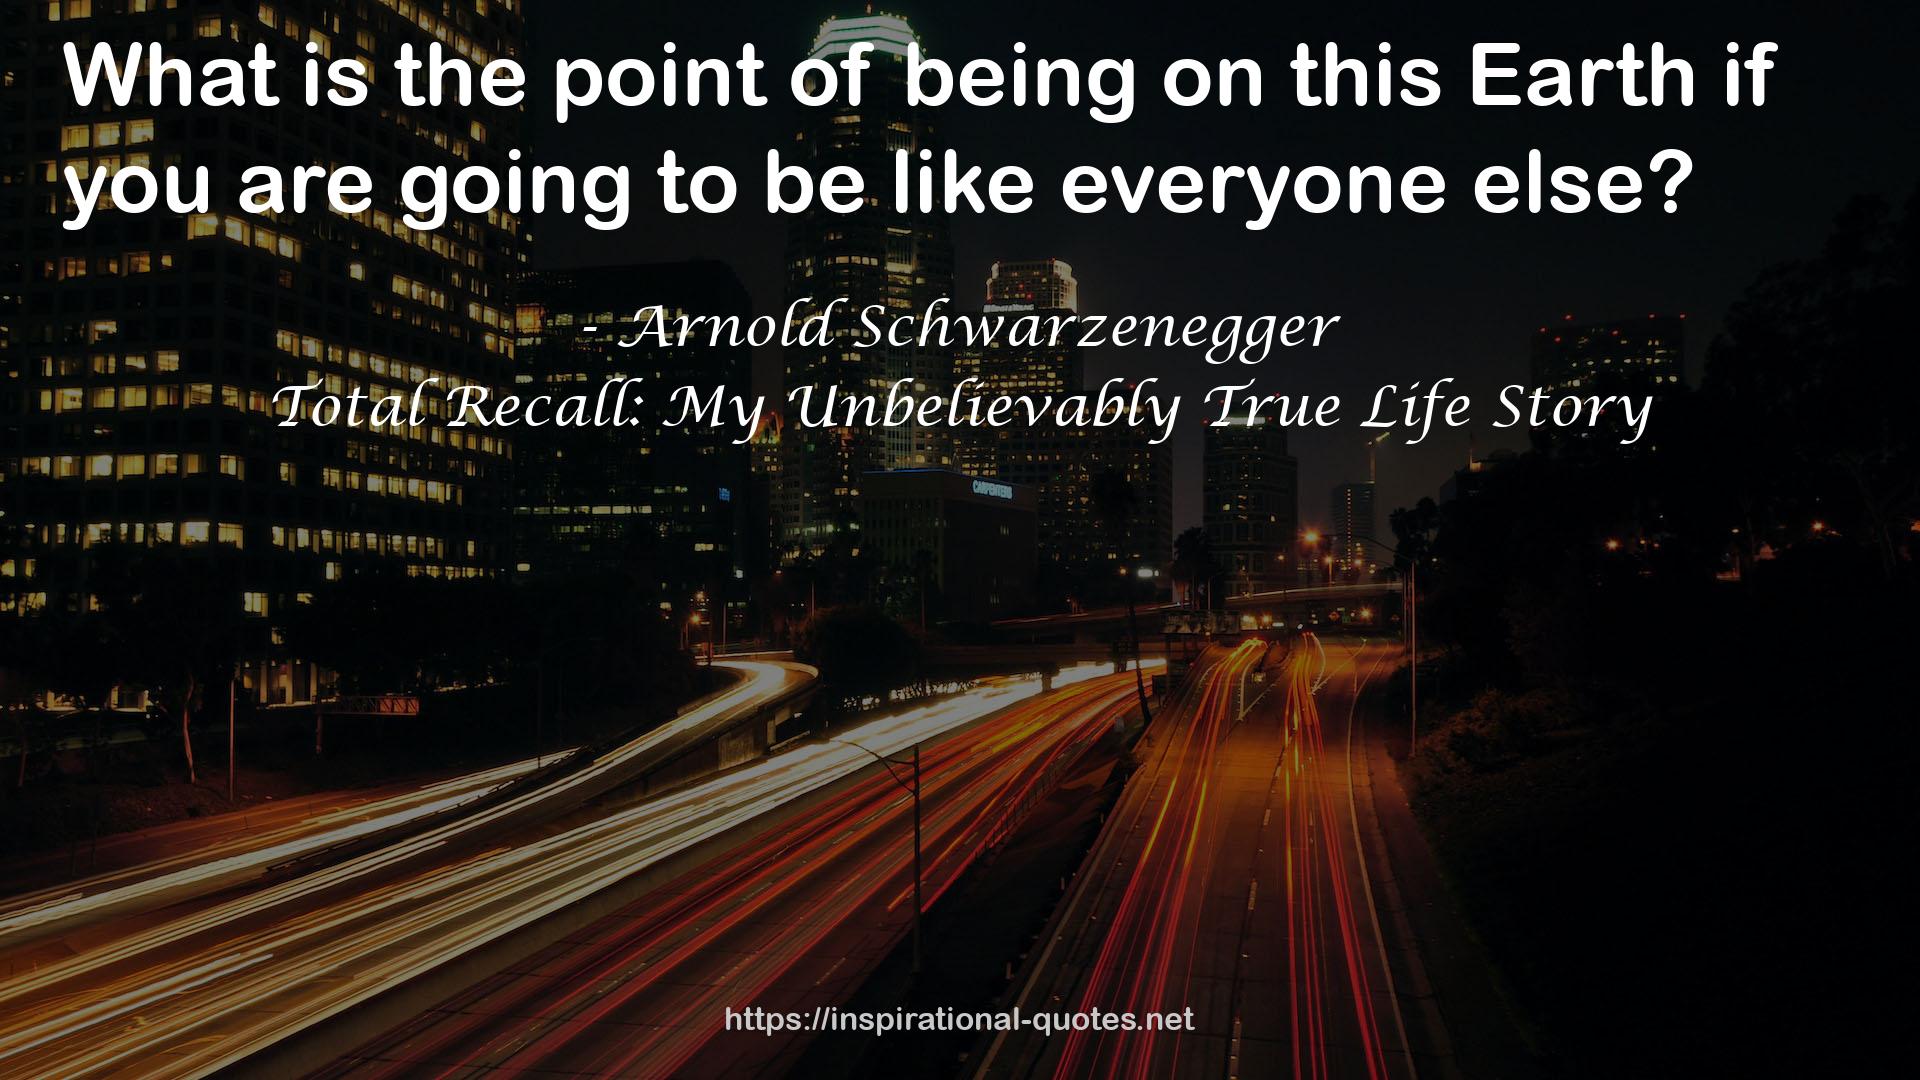 Total Recall: My Unbelievably True Life Story QUOTES